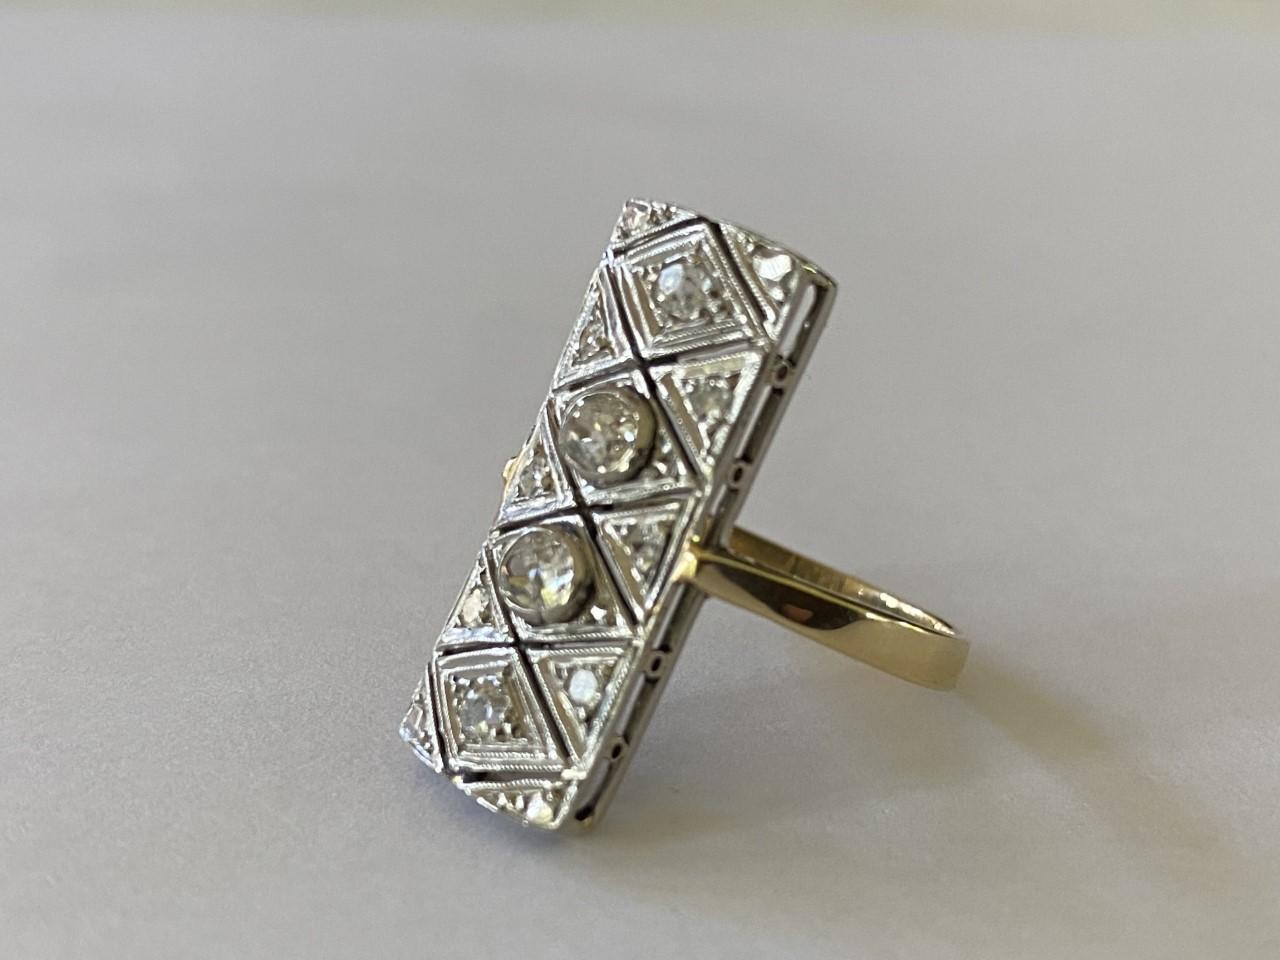 This vertical rectangular shaped dinner ring is designed around two Old Mine cut cushion-shaped diamonds each measuring 0.25 carats, accented with two smaller Old Mine cut diamonds measuring 0.10 carats each and further embellished with six single